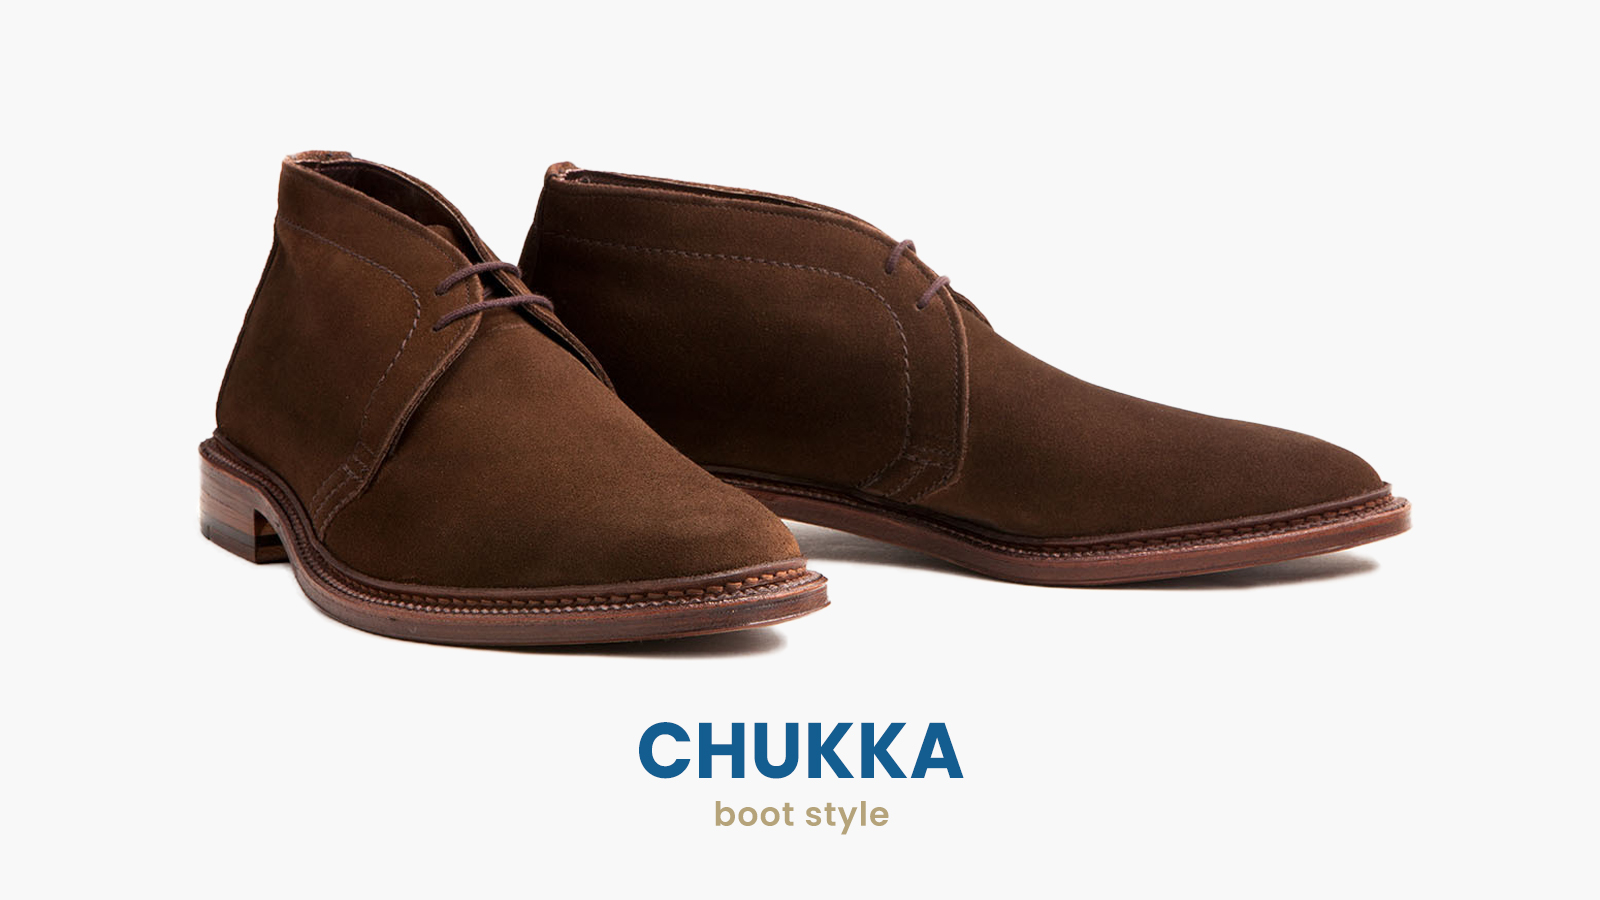 chukka suede boot style for men